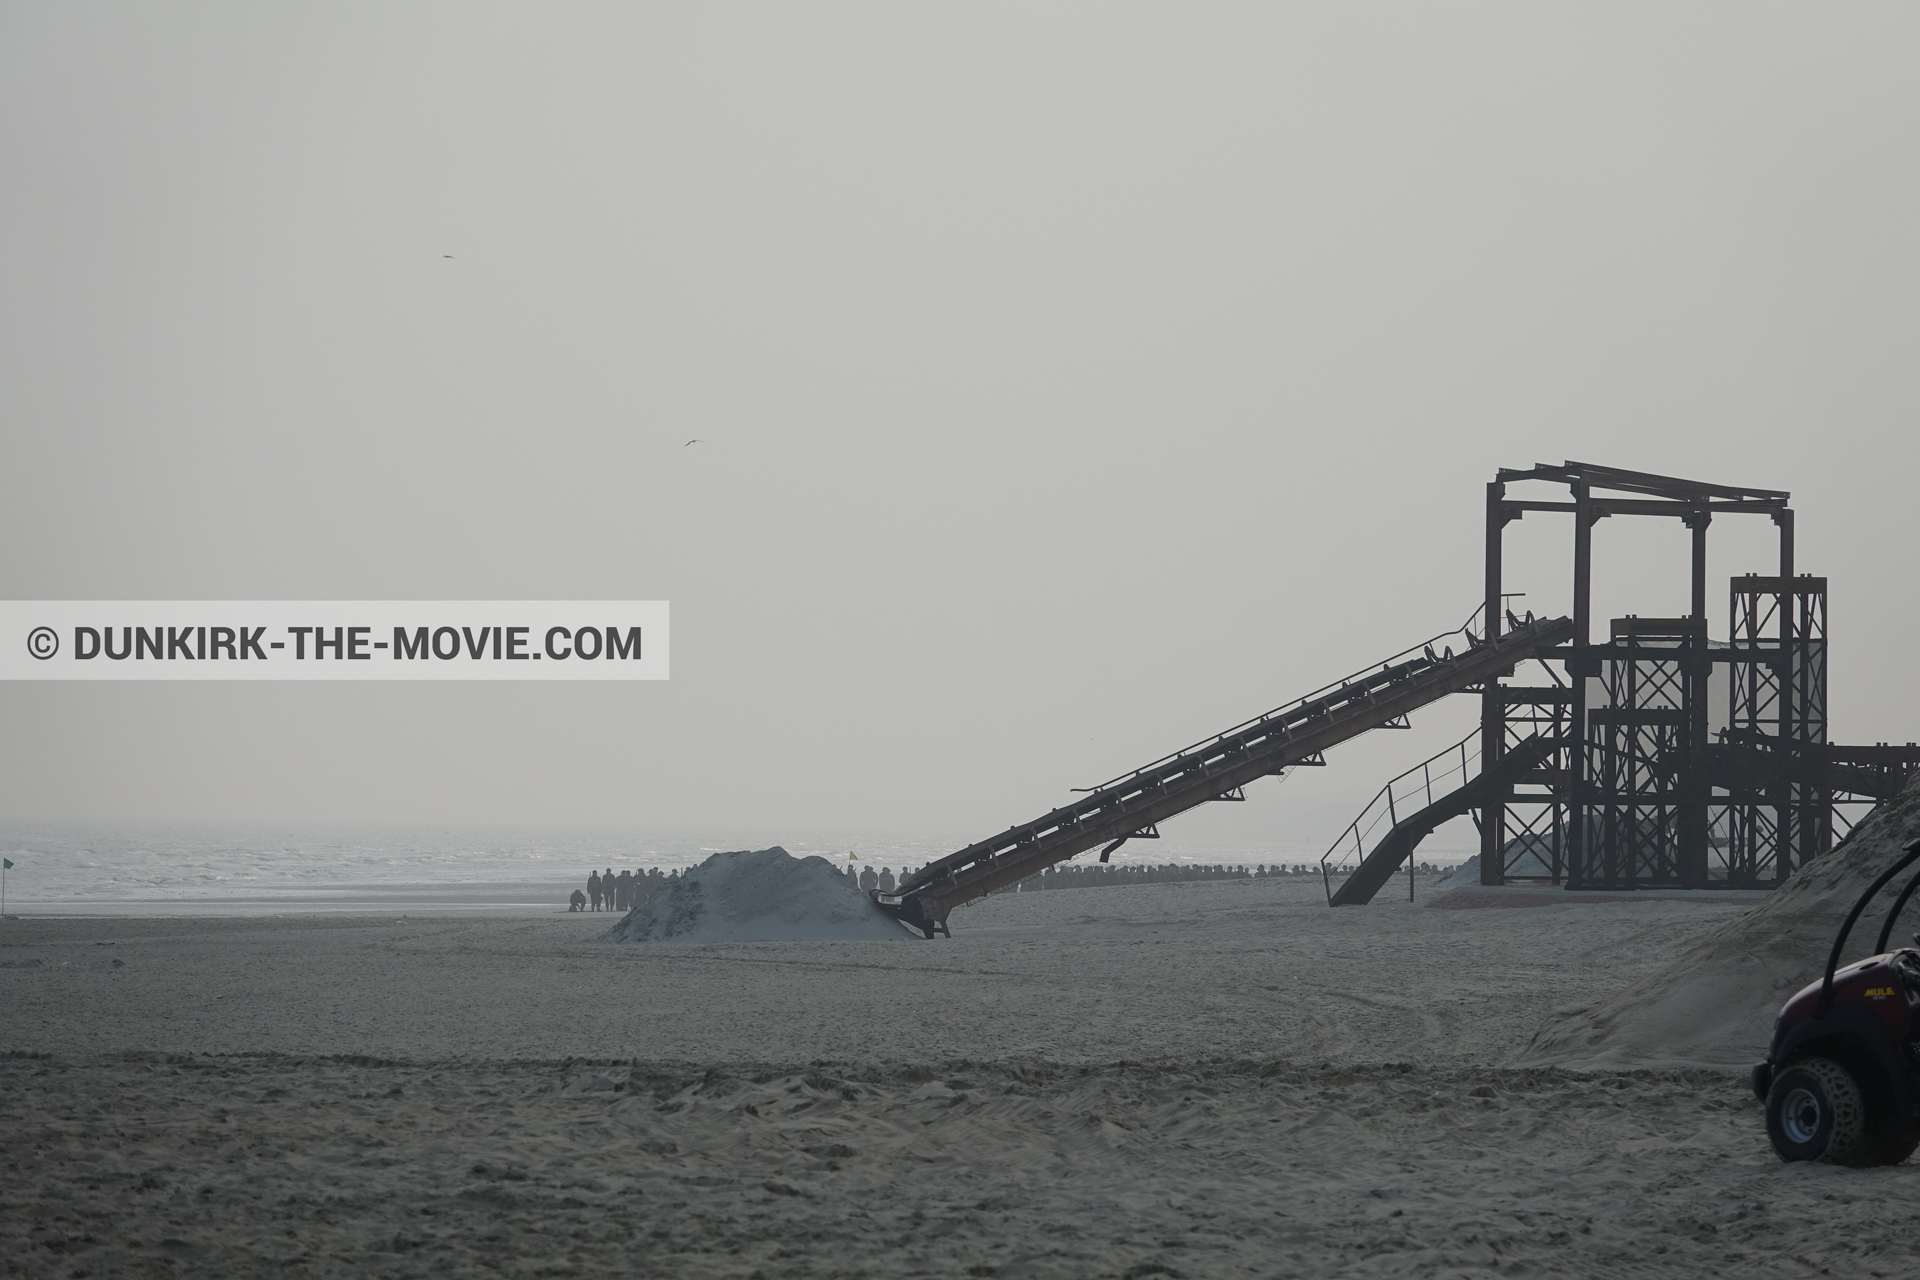 Picture with grey sky, decor, supernumeraries, beach,  from behind the scene of the Dunkirk movie by Nolan